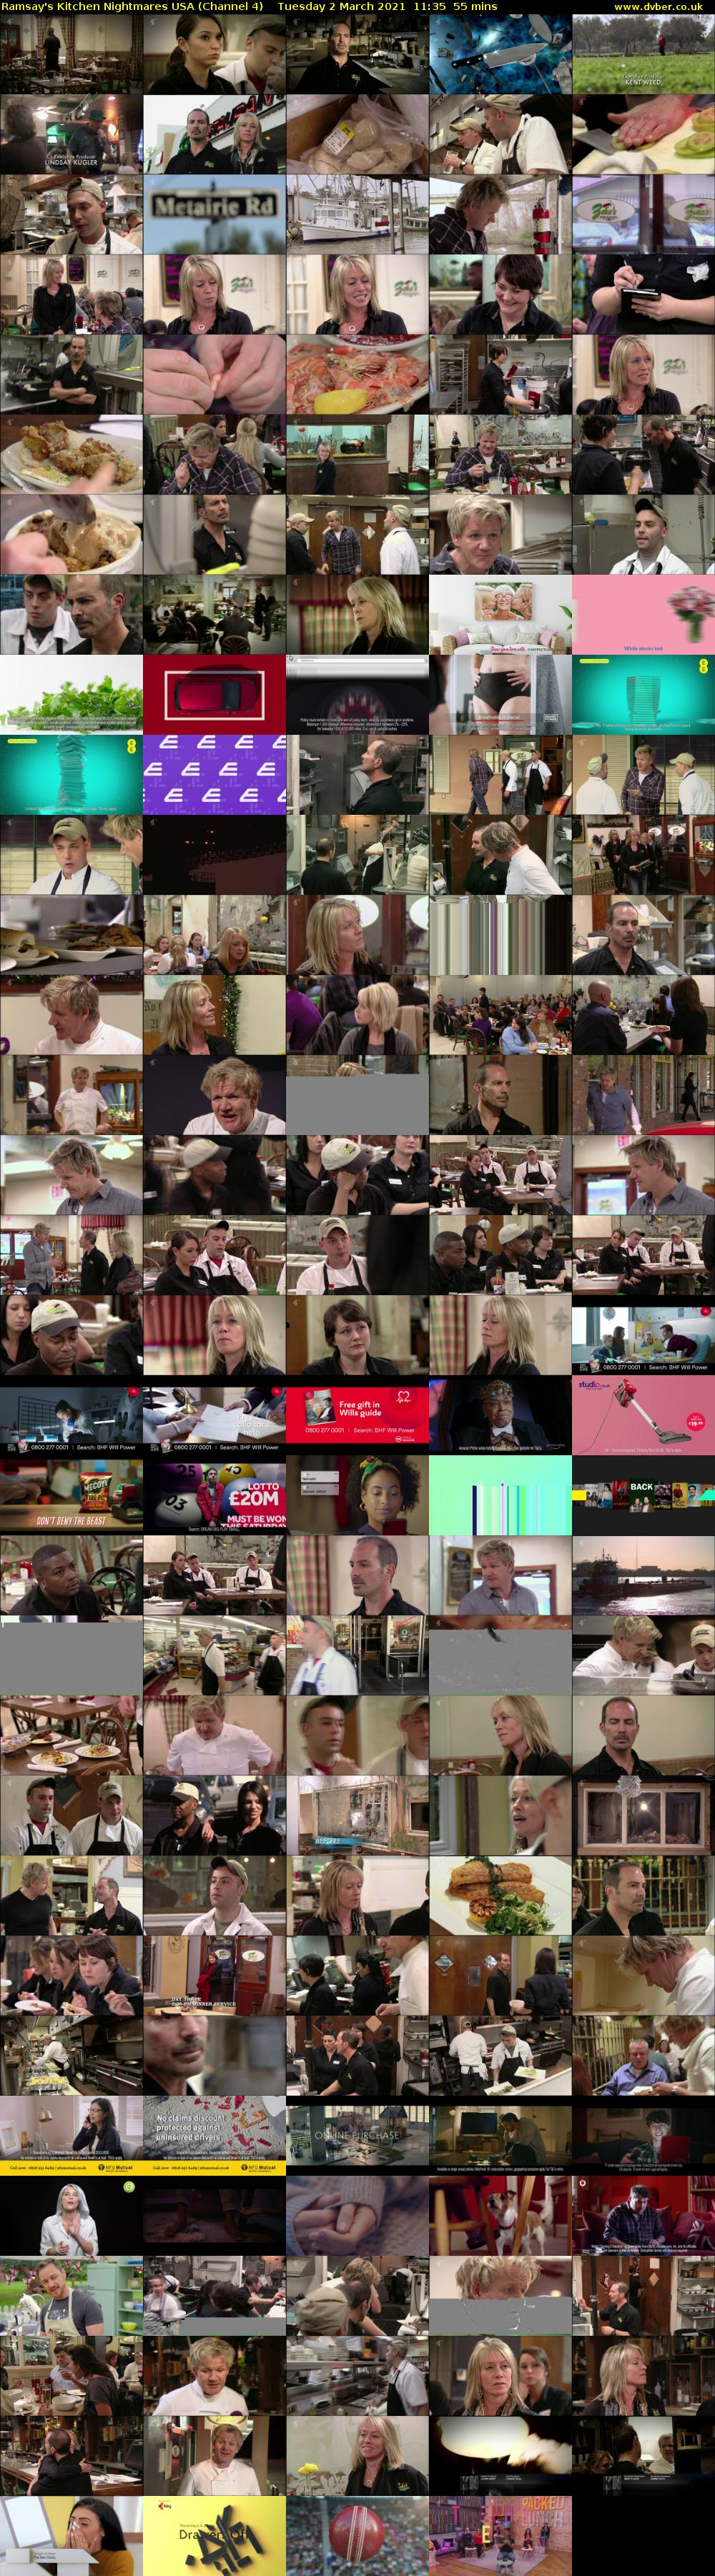 Ramsay's Kitchen Nightmares USA (Channel 4) Tuesday 2 March 2021 11:35 - 12:30